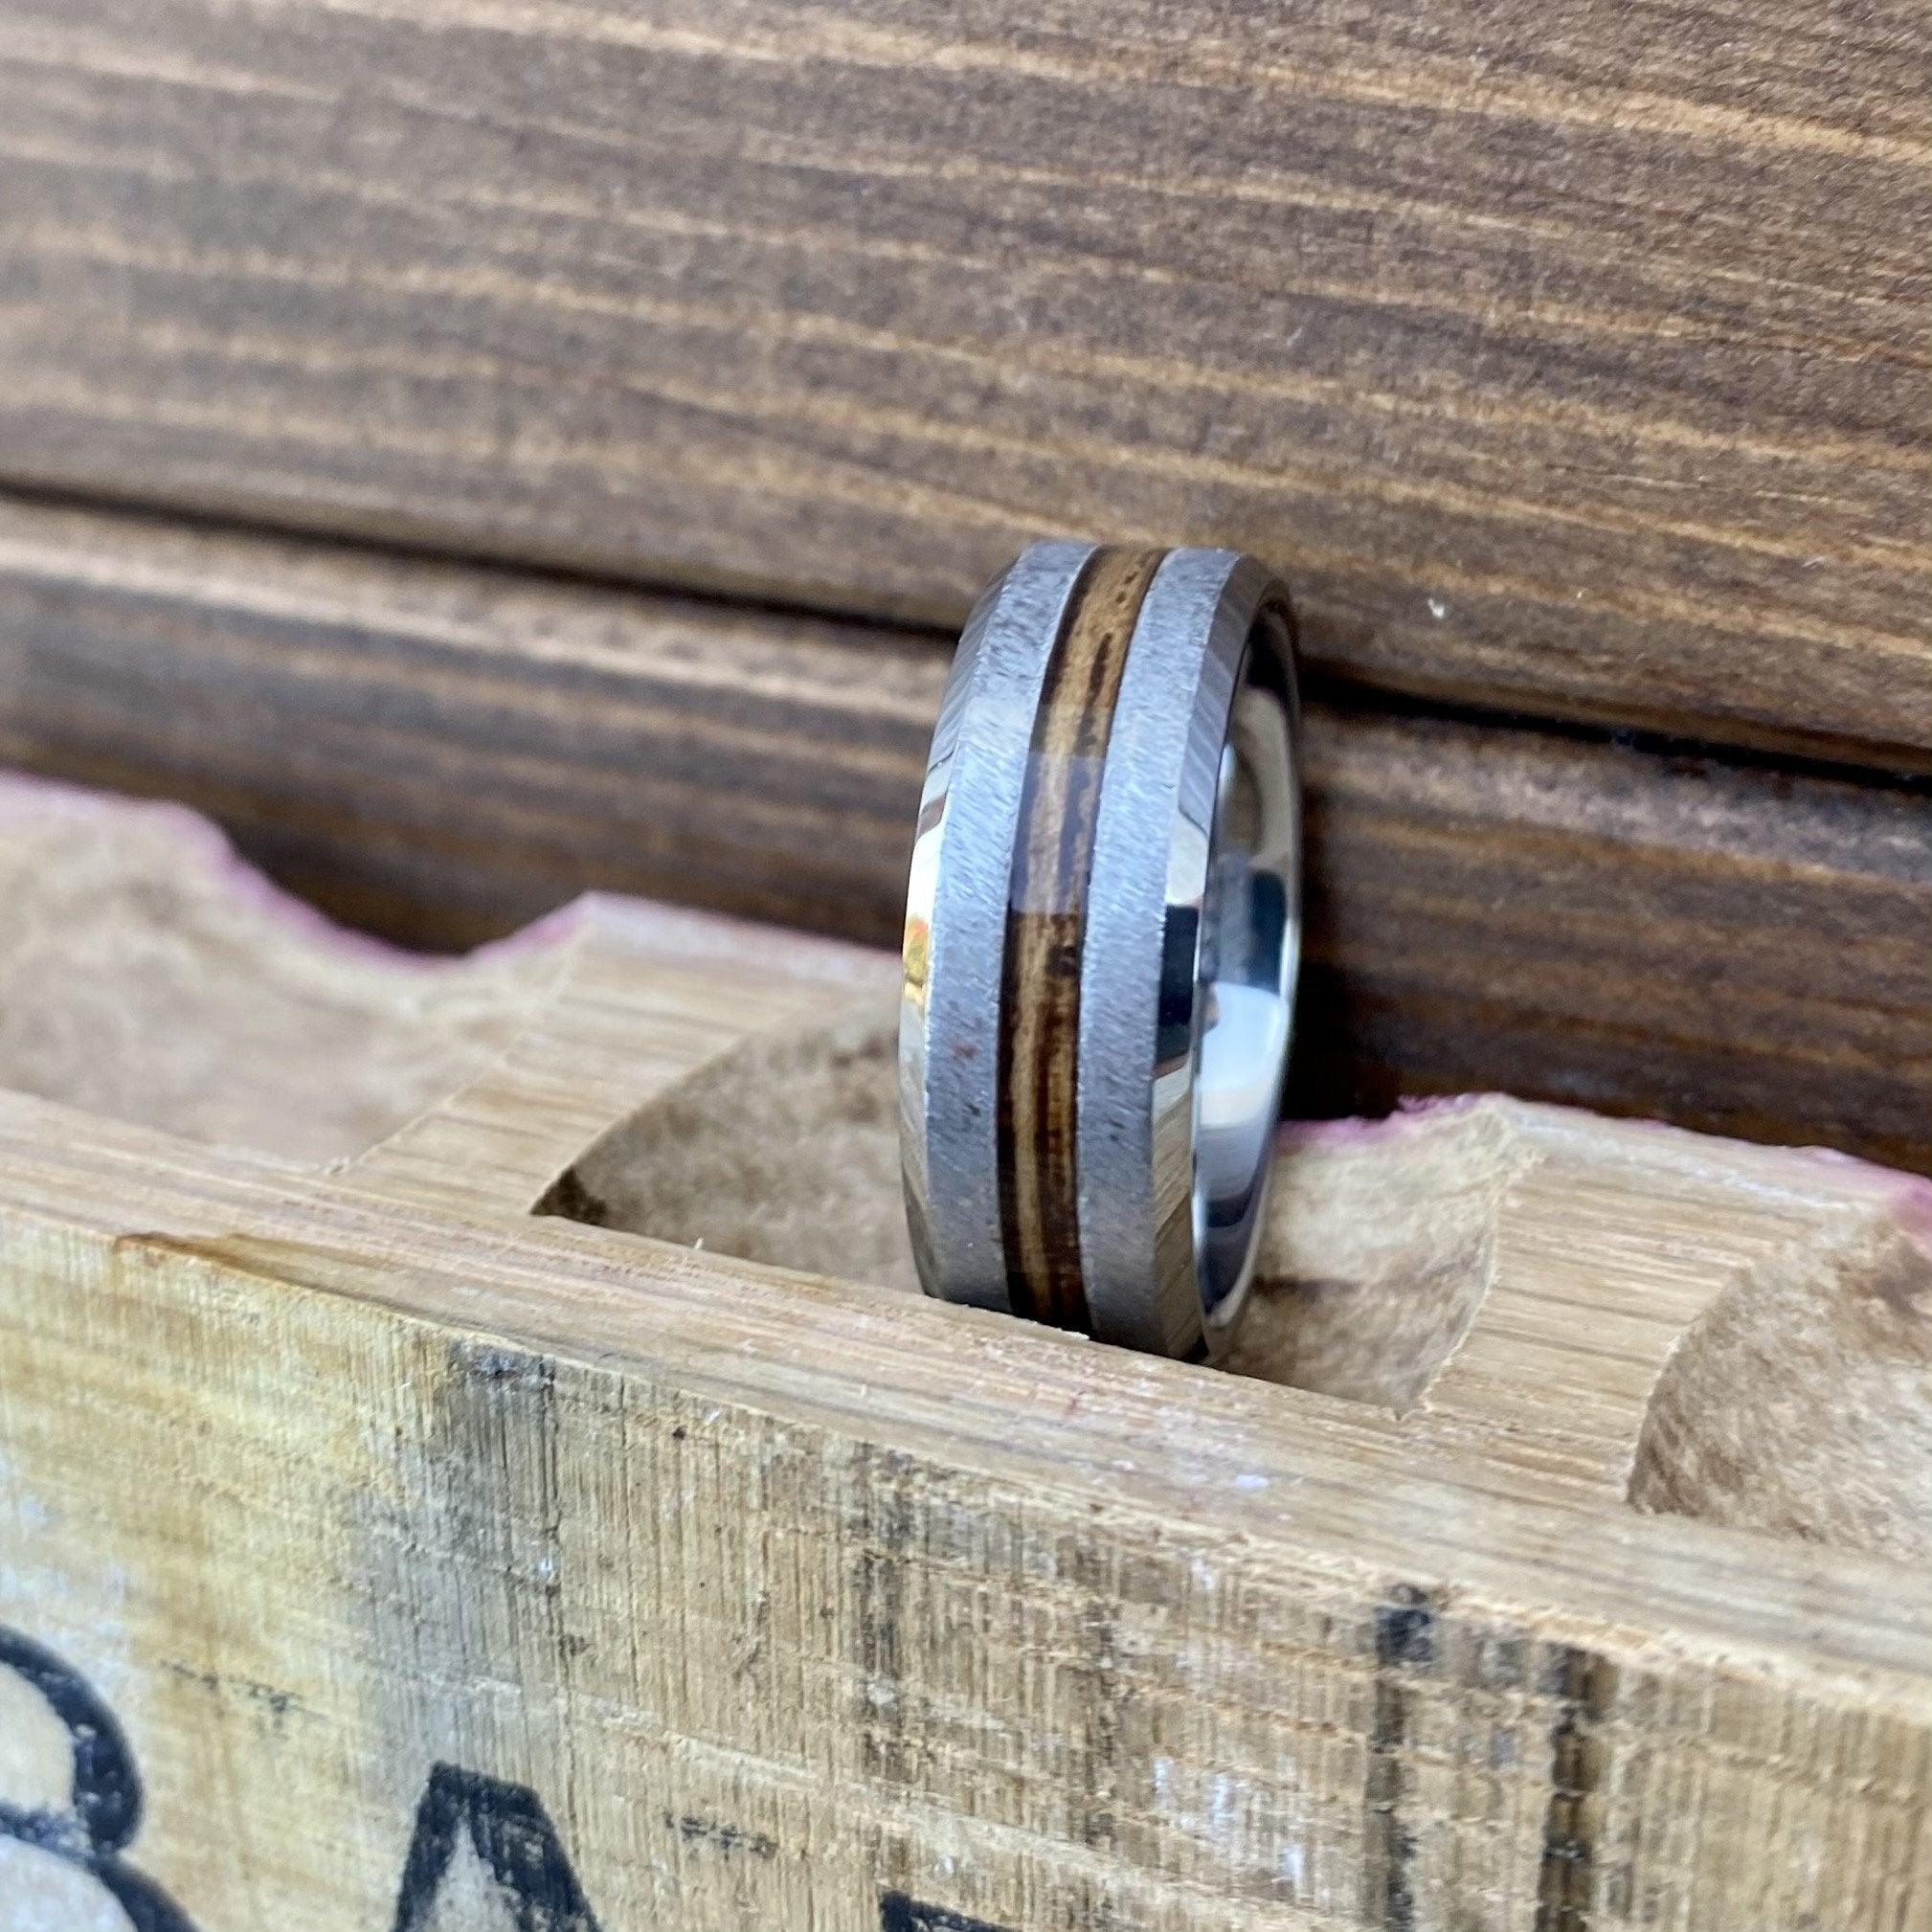 BW James Jewelers ALT Wedding Band "The Pursuer" 100% USA Made Build Your Own Ring Rugged Tungsten Beveled Edge Band with Grain Finish